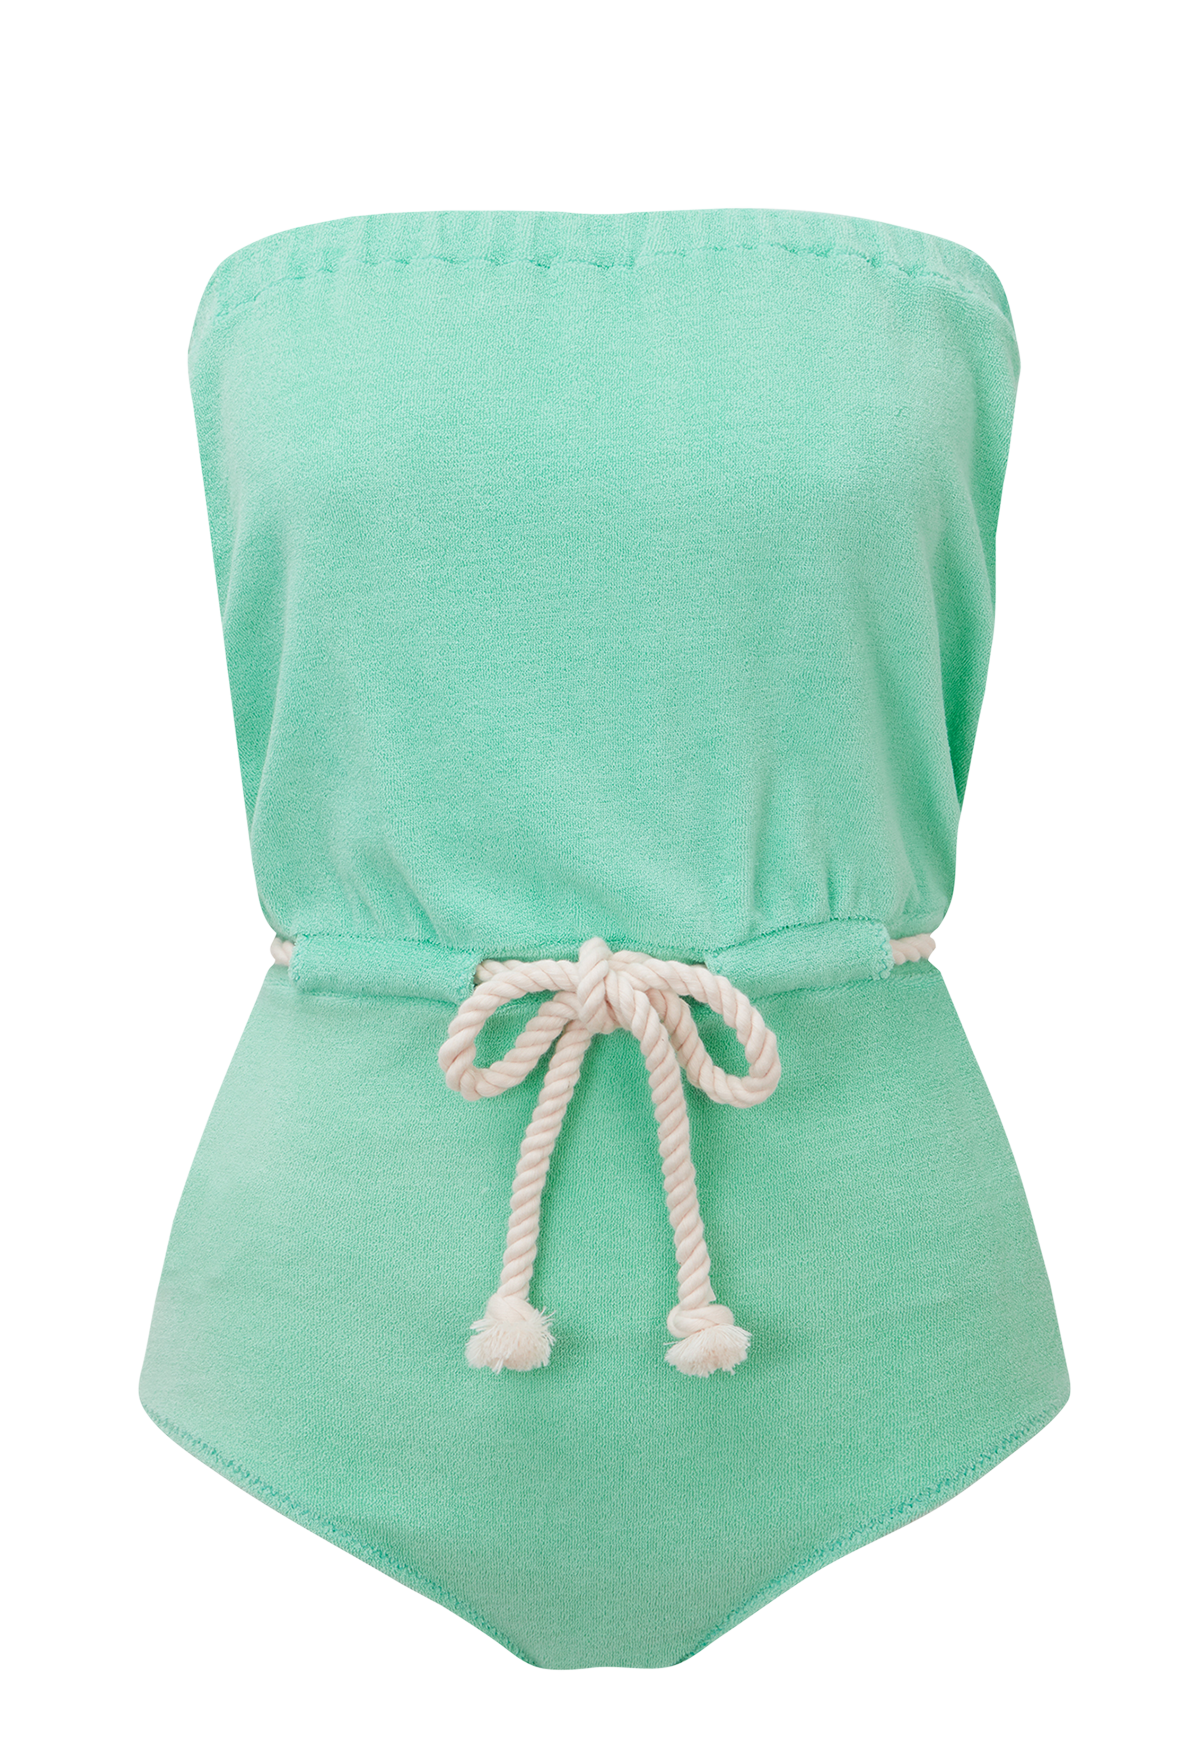 THE VICTOR MAILLOT in SEAFOAM TERRY CLOTH